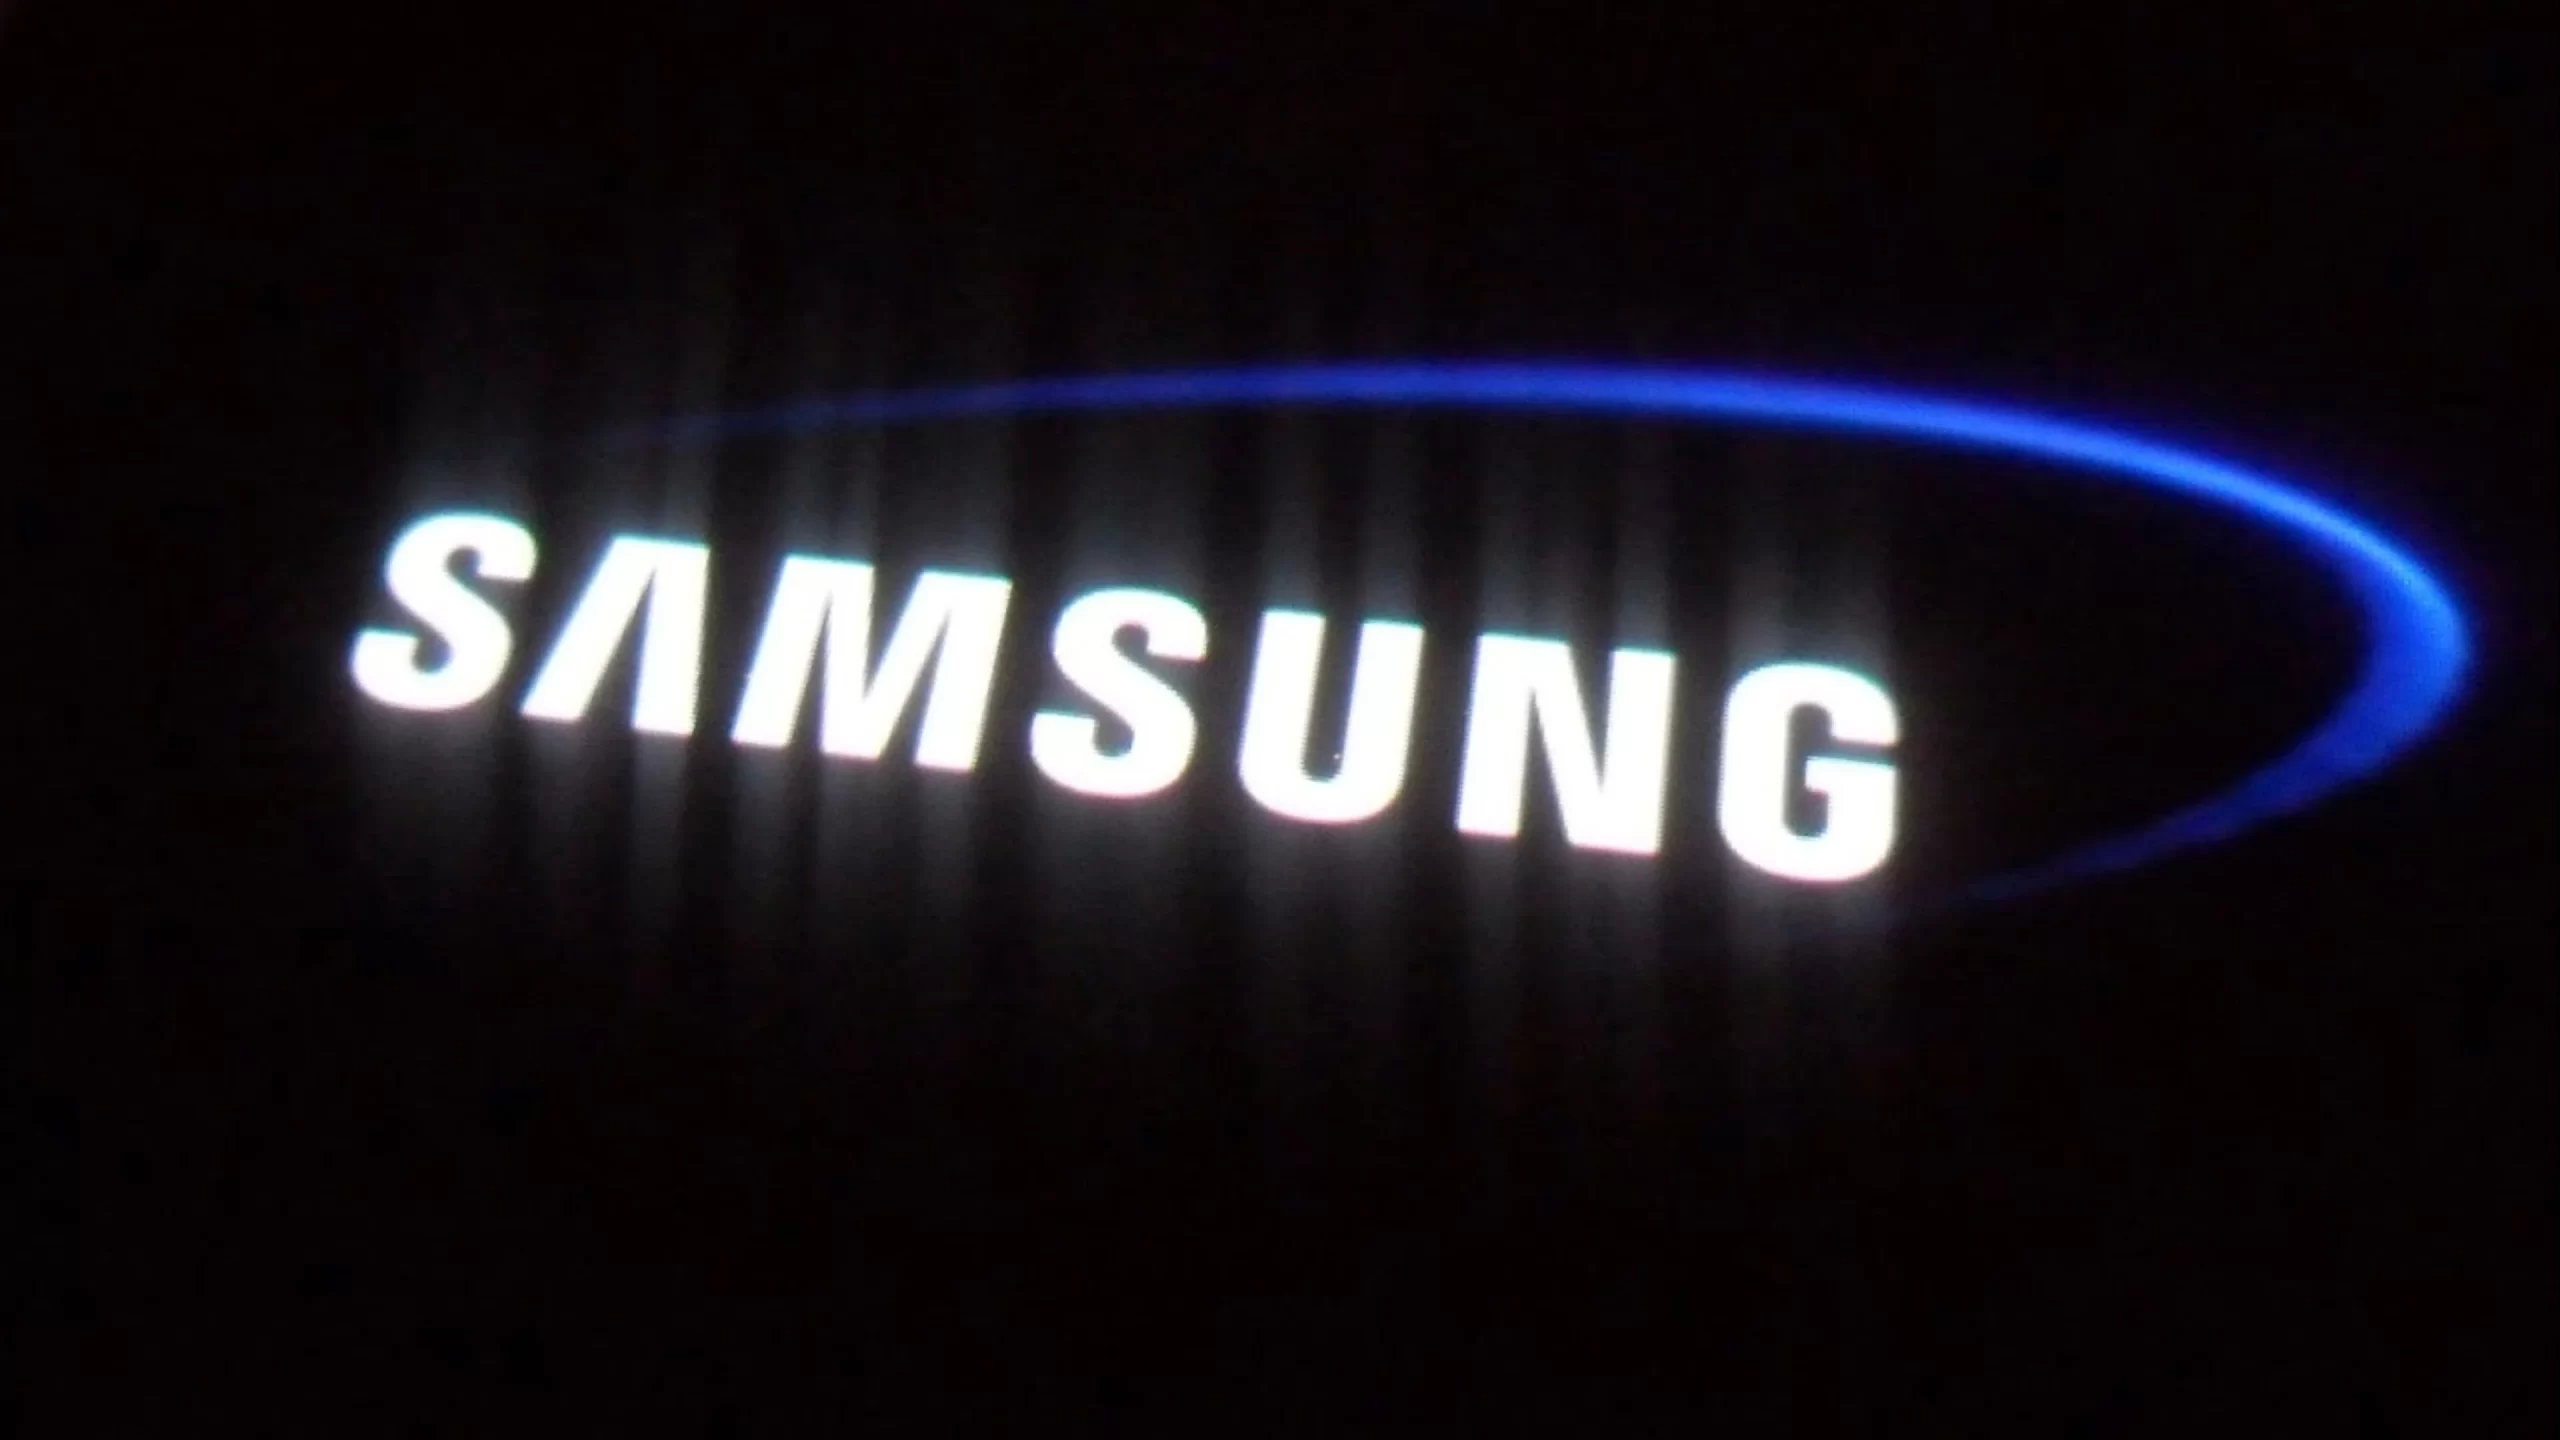 Samsung Launches New Range of UHD Business TVs